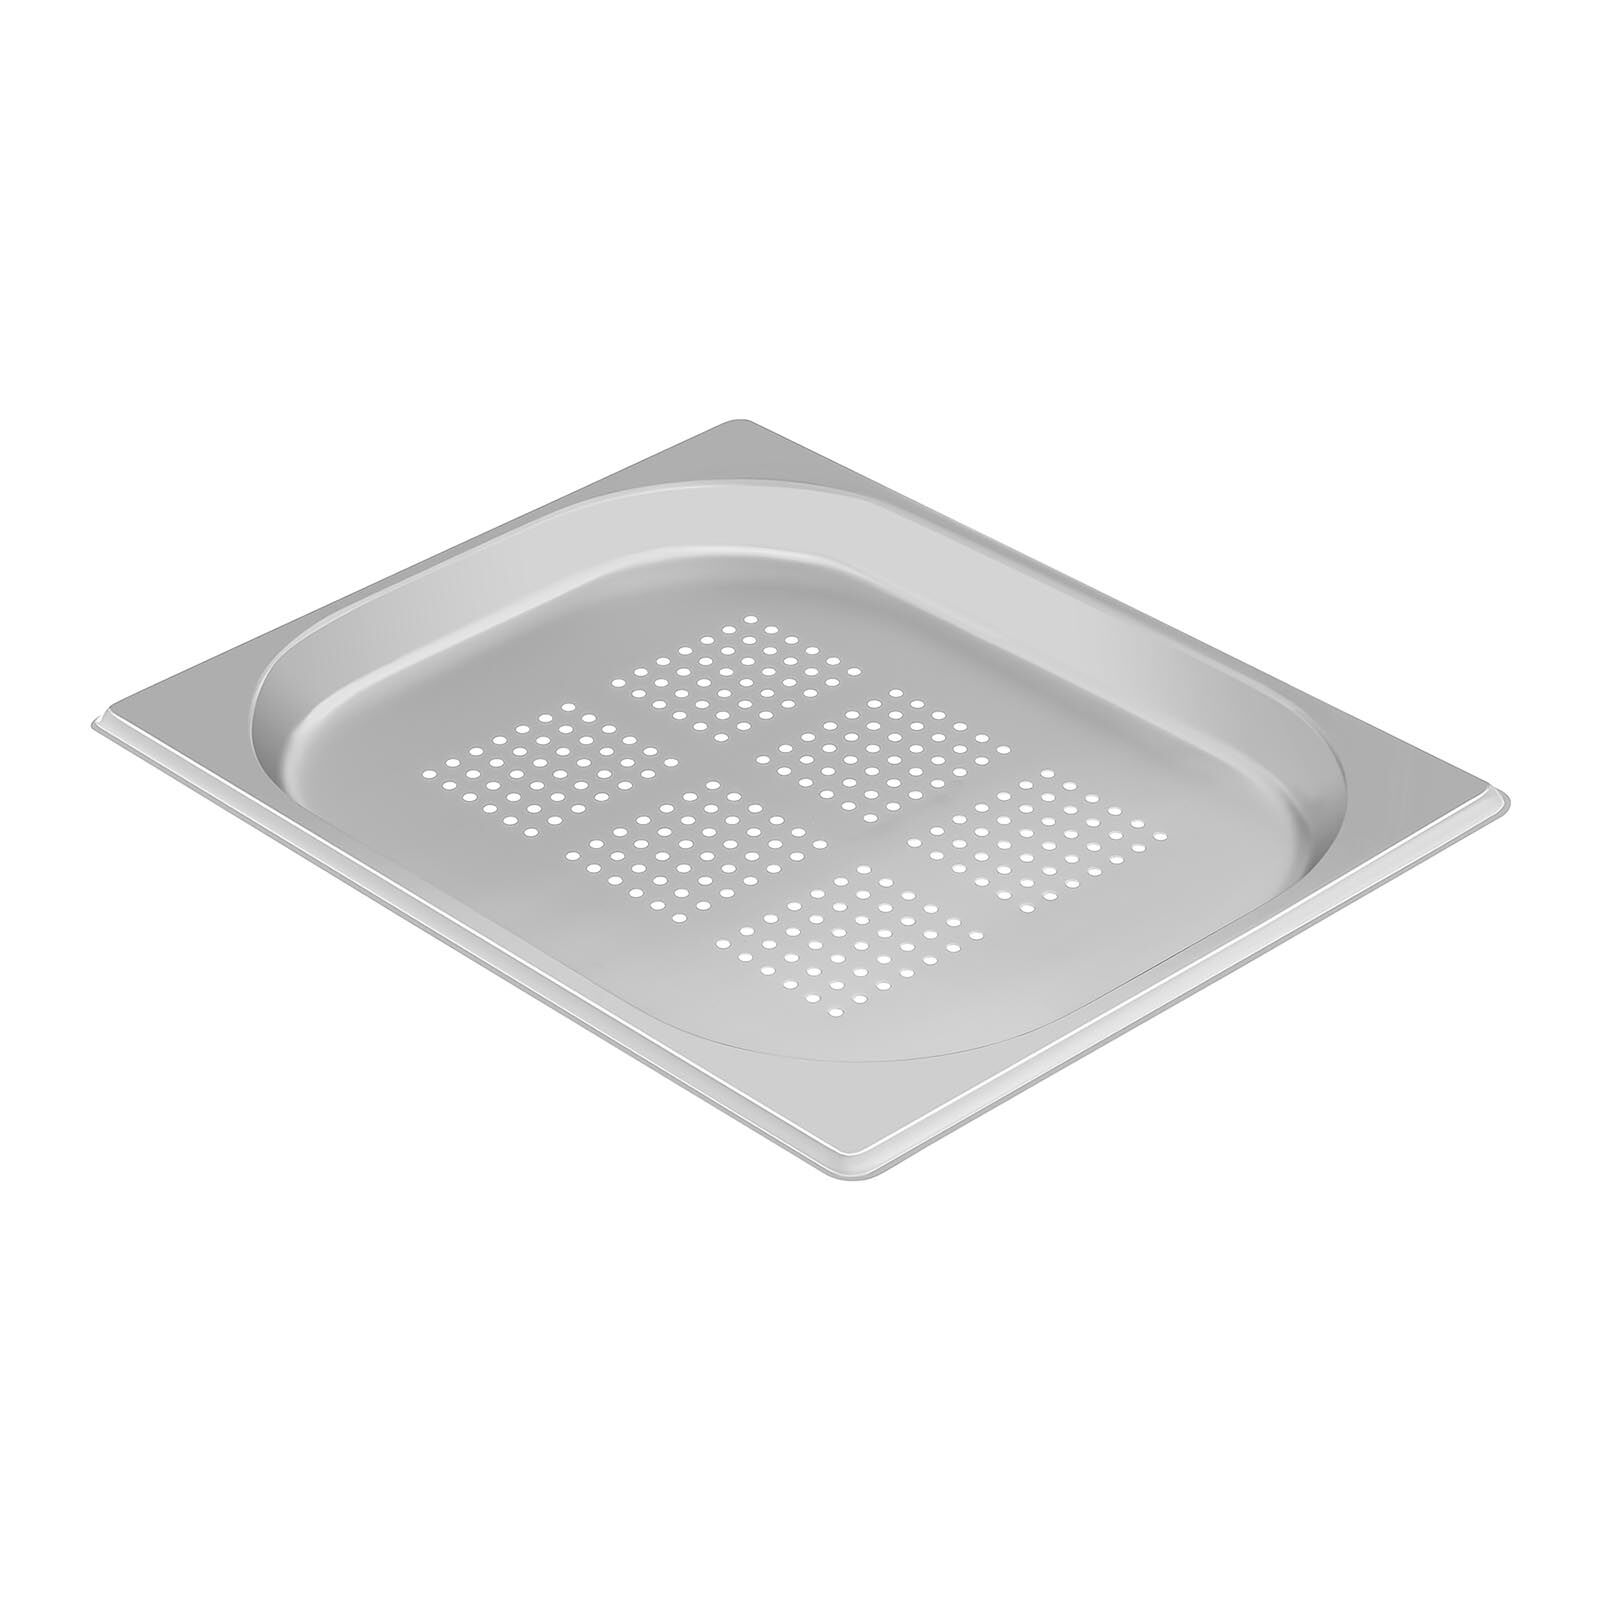 Royal Catering Gastronorm Tray - 1/2 - 20 mm - Perforated RCGN-P1/2X20